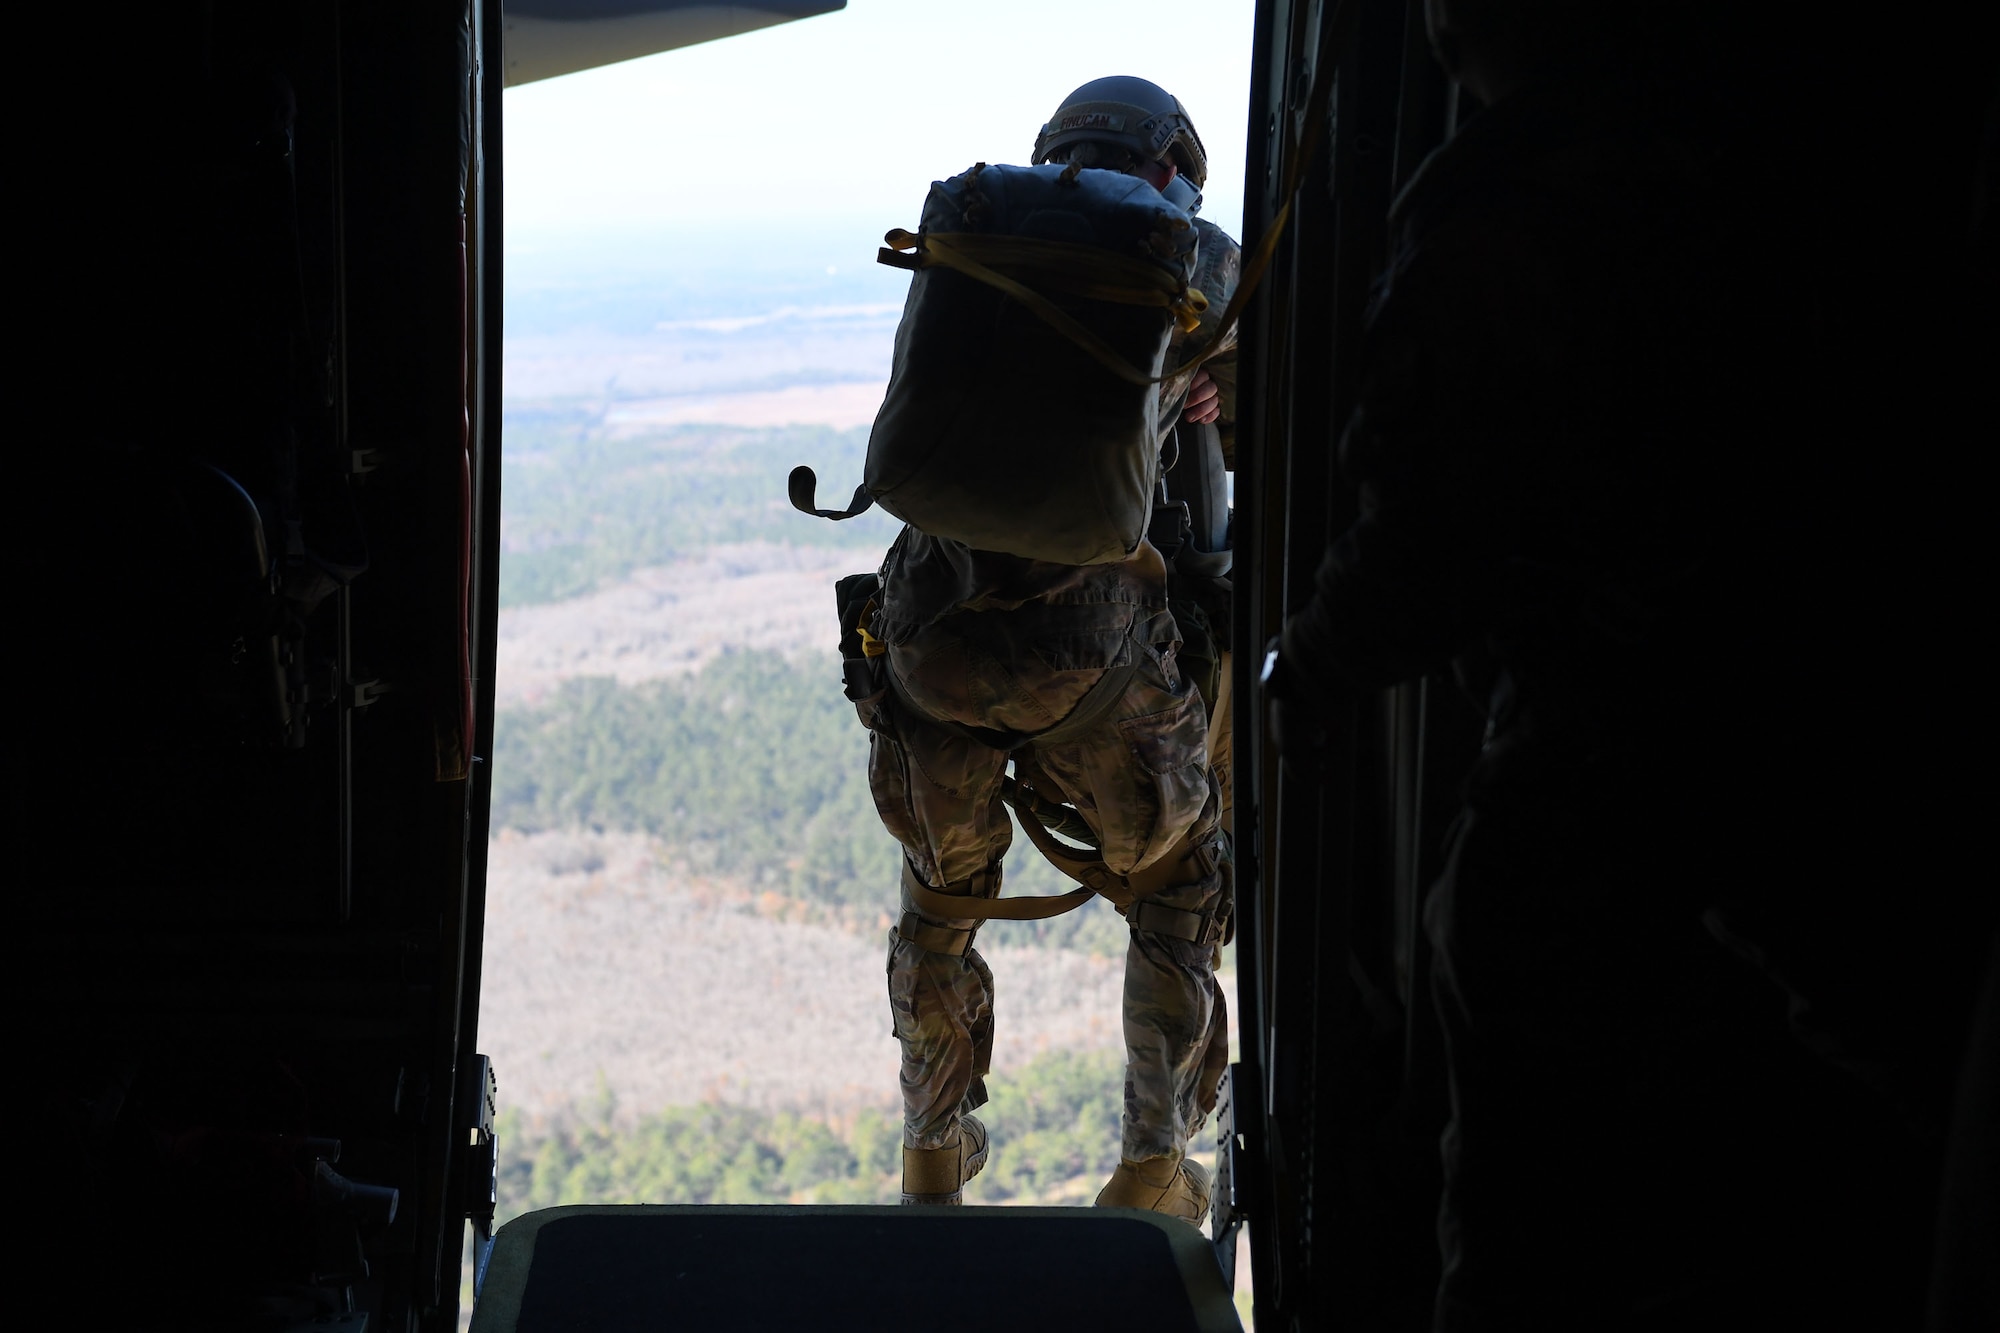 Capt. Timothy Finucan, 93d Air Ground Operations Wing jumpmaster, jumps out of an HC-130J Combat King II on a static-line parachute, Nov. 21, 2018, near Moody Air Force Base, Ga. The overall objective of the training was to increase jumpers’ skills, knowledge and proficiency in regards to airborne operations. During a static-line jump, the jumper is attached to the aircraft via the ‘static-line’, which automatically deploys the jumpers’ parachute after they’ve exited the aircraft. (U.S. Air Force photo by 1st Lt. Faith Brodkorb)